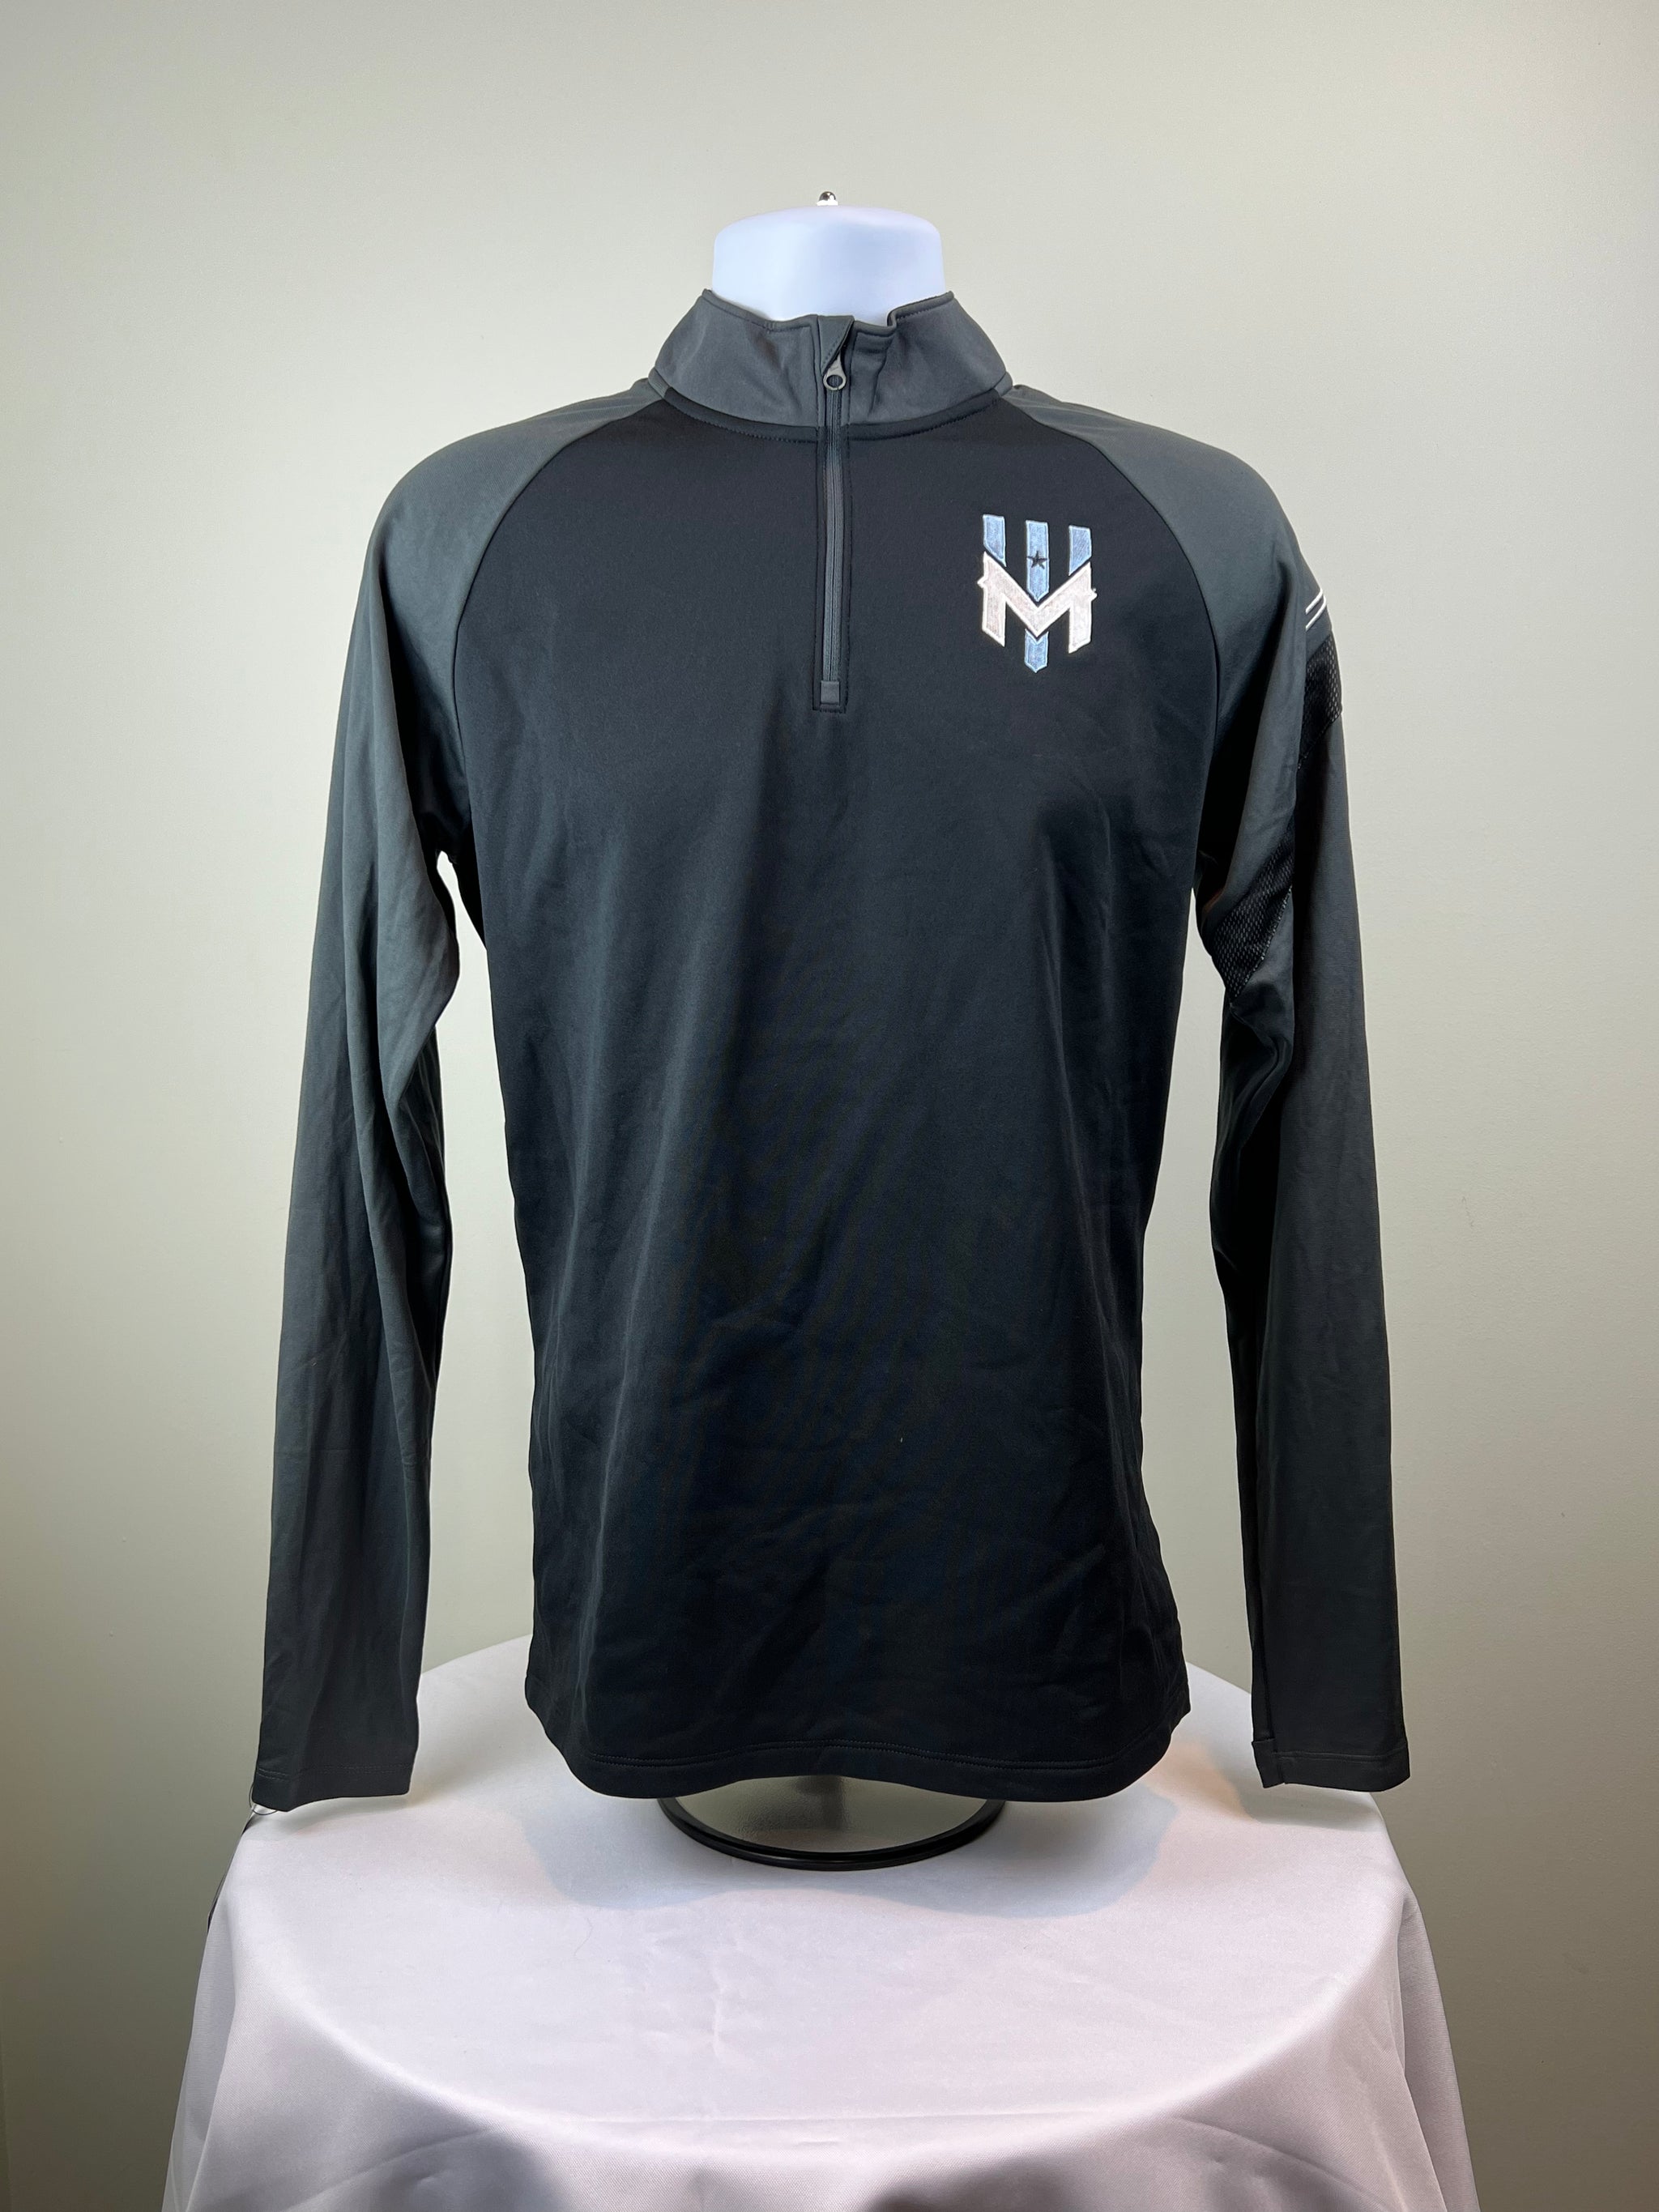 Wind Chill Warm-Up Jacket - Nike Academy 20 Drill Top